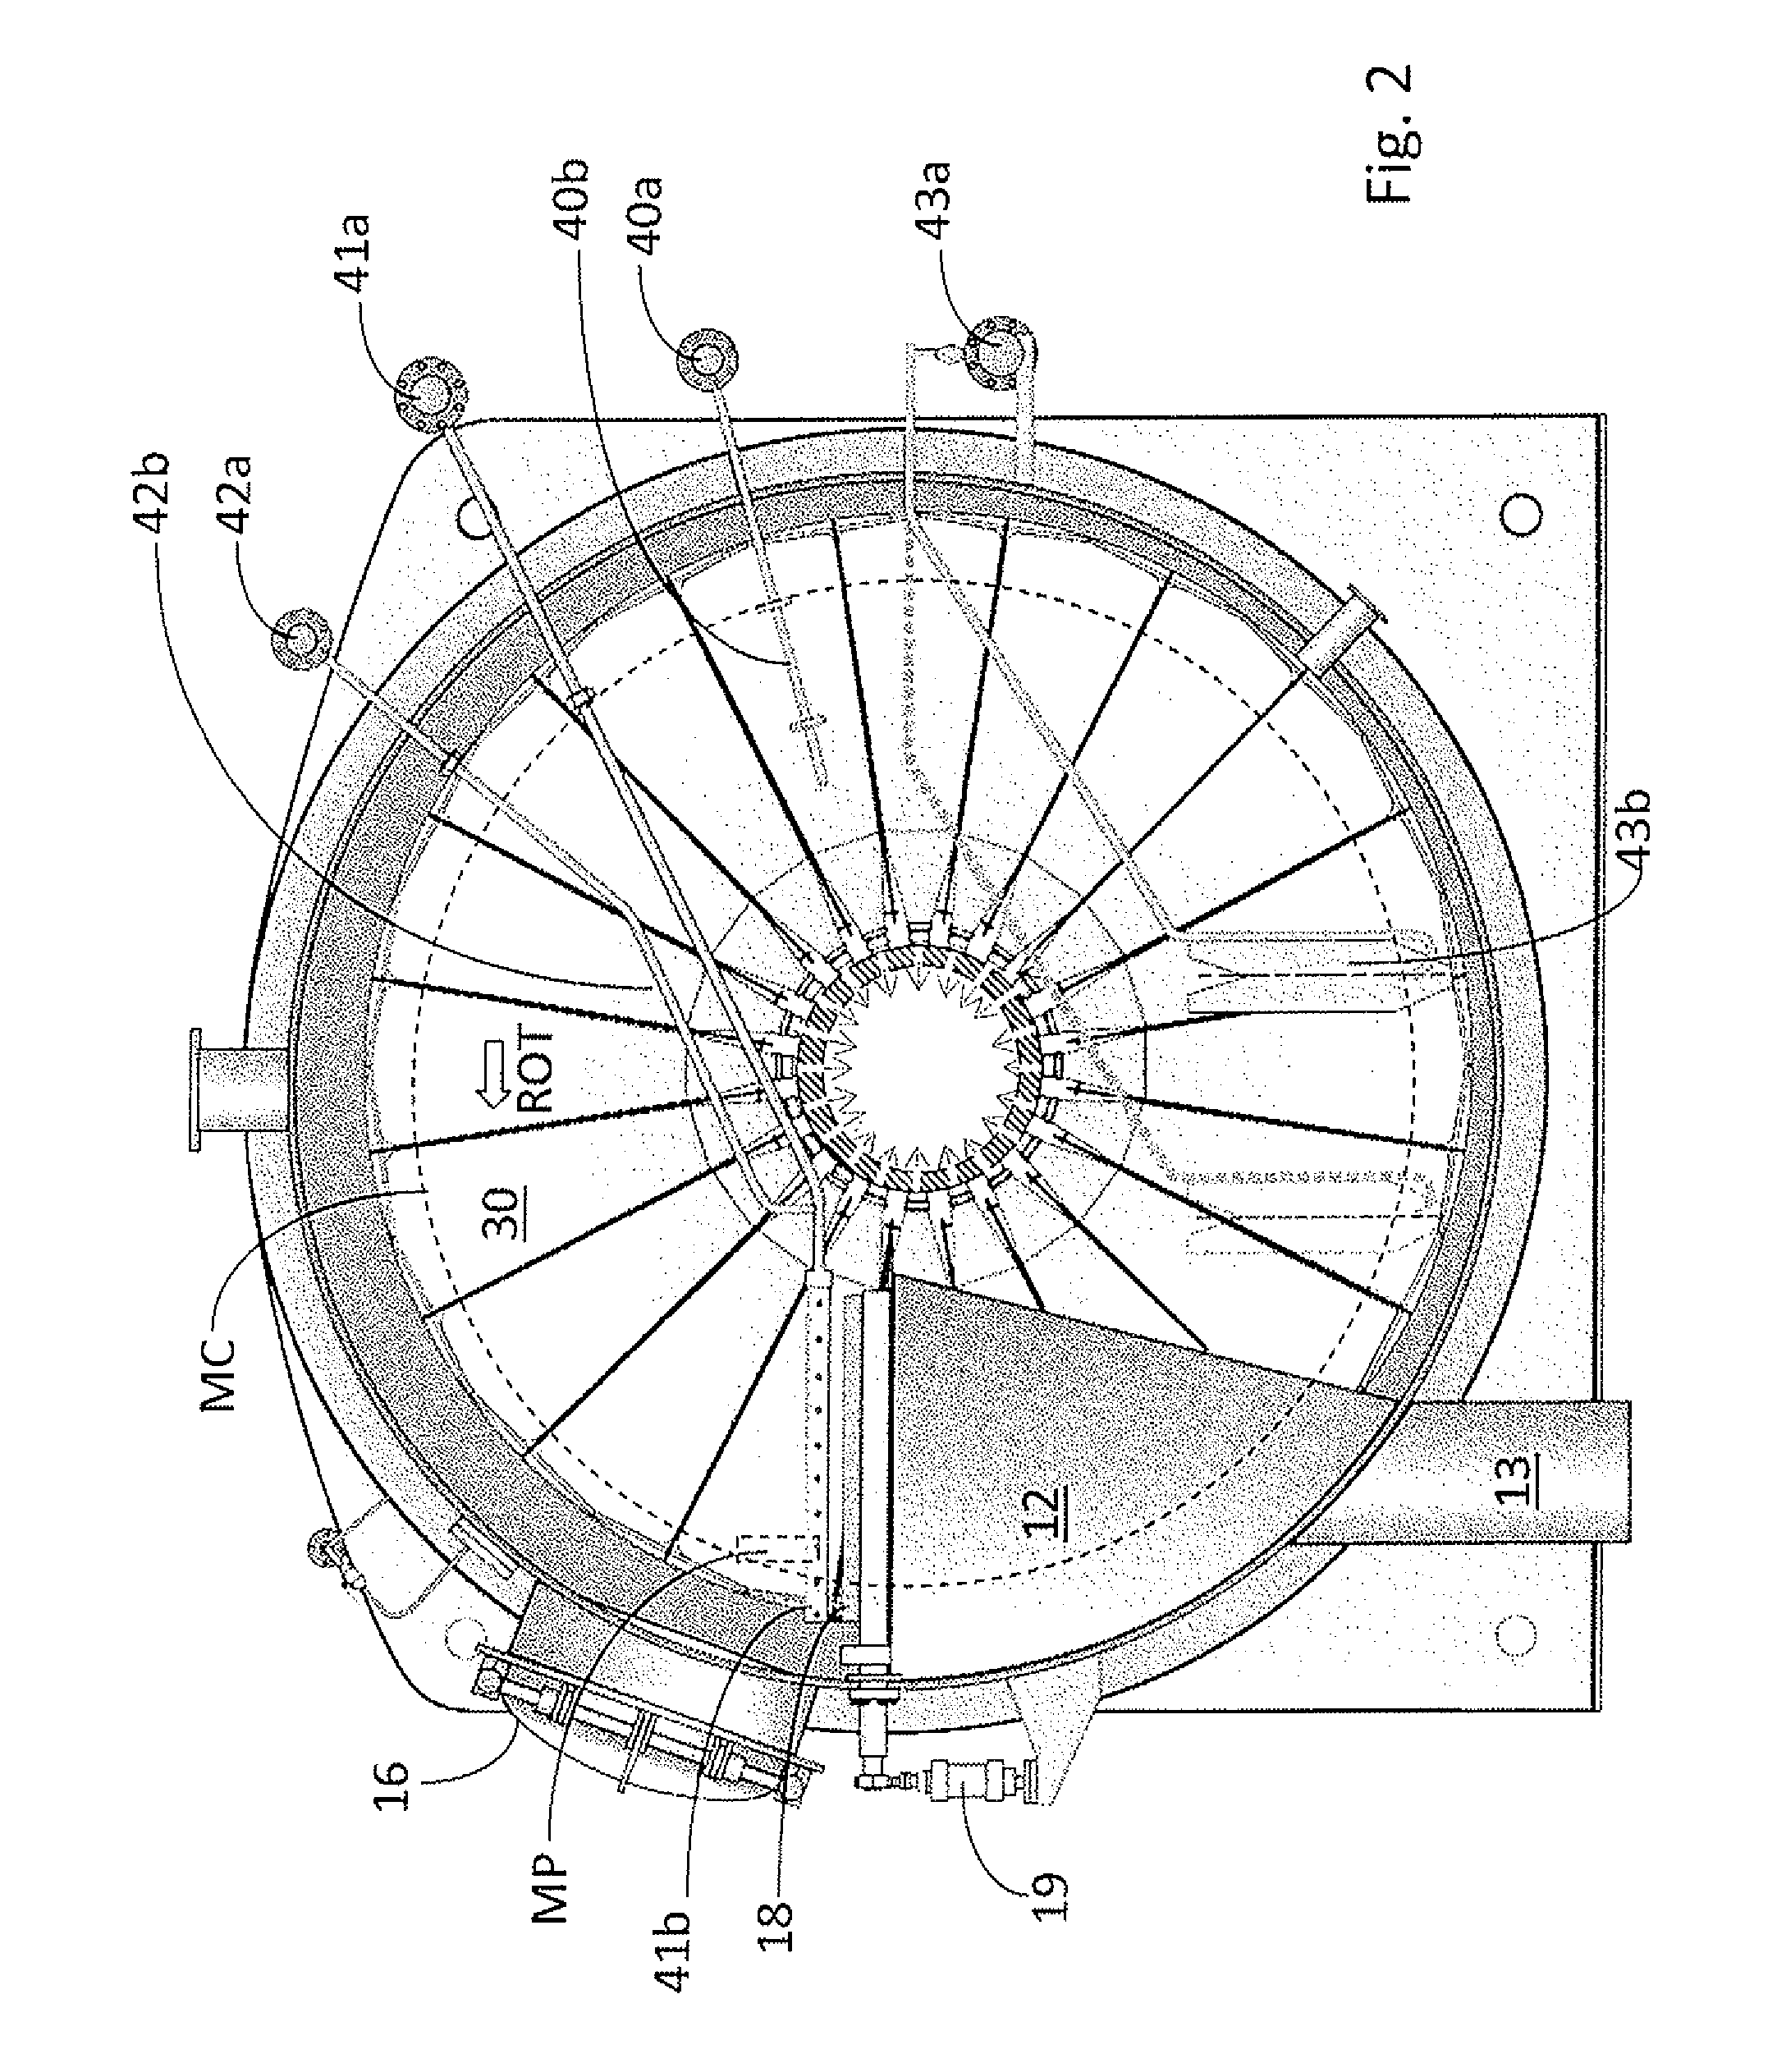 Method and equipment for measuring the filter sectors in disc filters